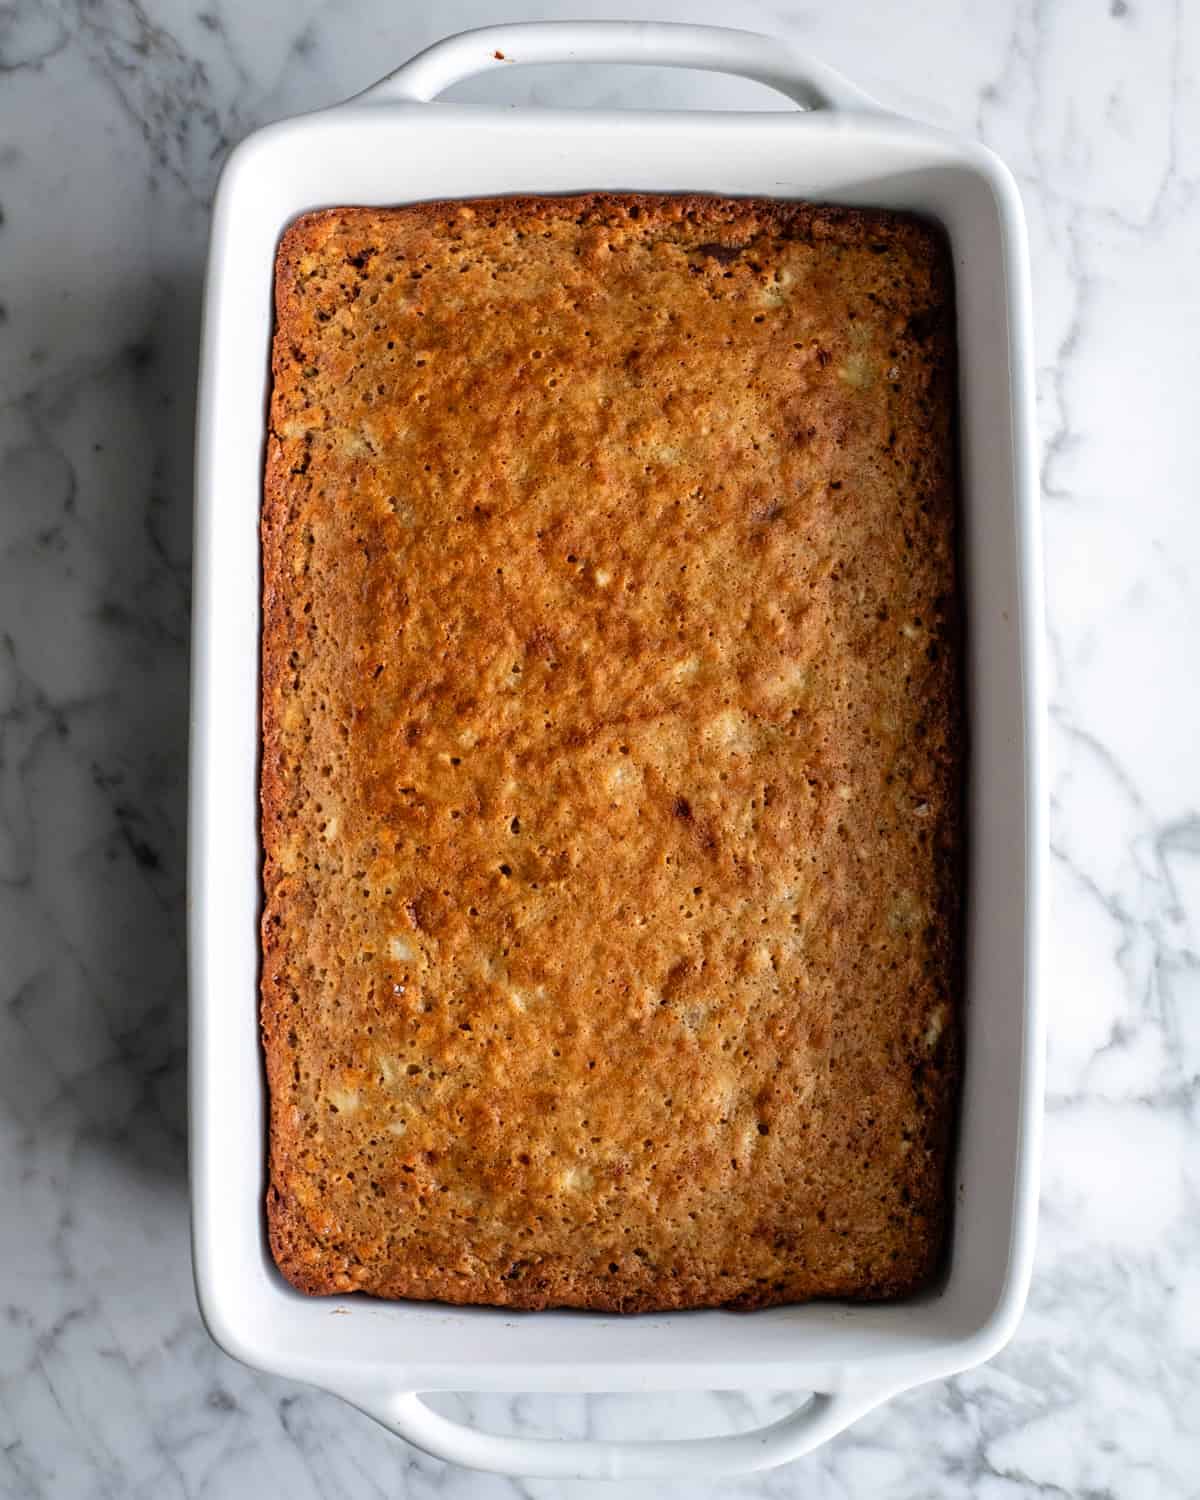 baked banana cake in a cake pan before frosting